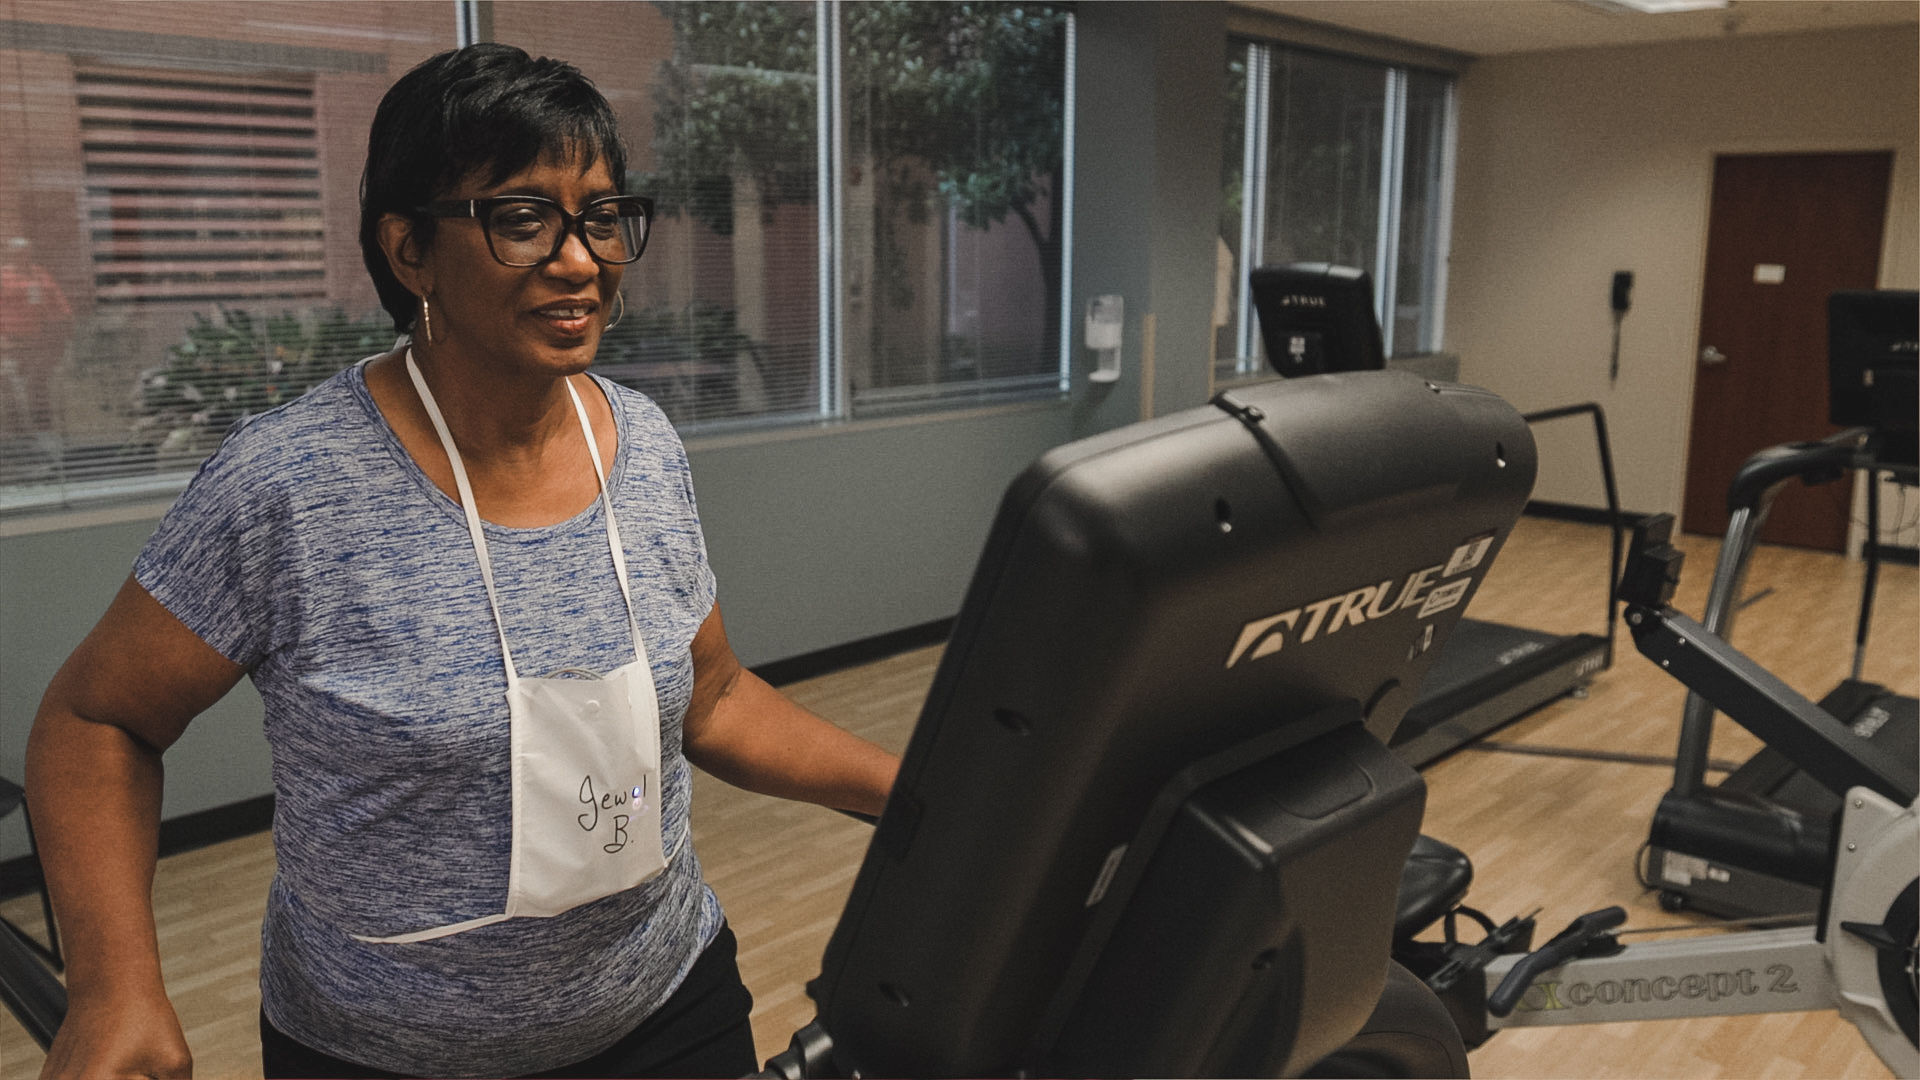 After completing Intensive Cardiac Rehab at Sentara, Jewel Bass now places self-care first.